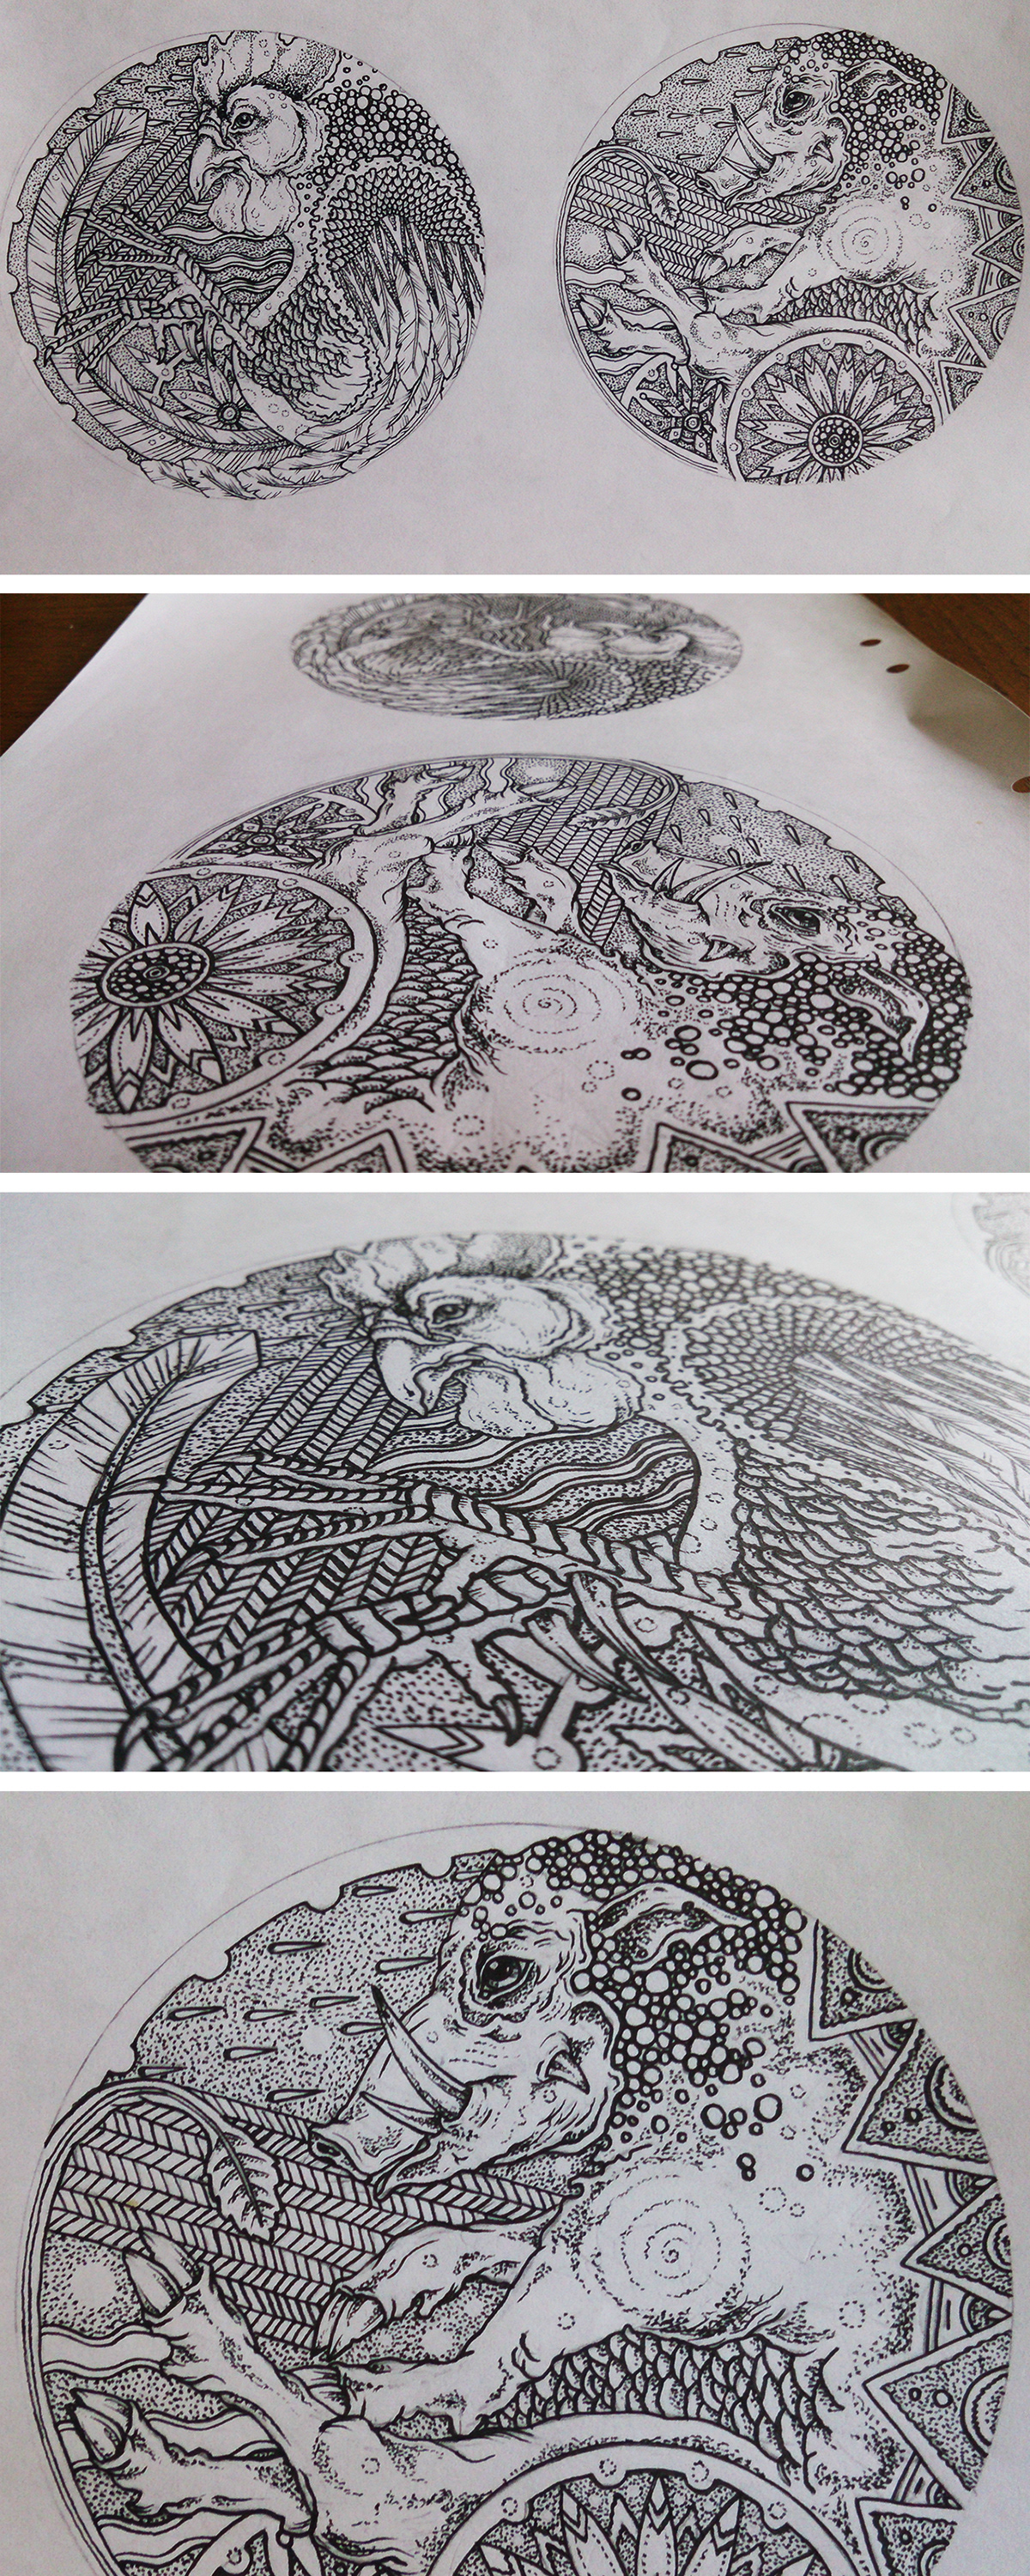 drawn  by hand  ink  pencil  paper  art